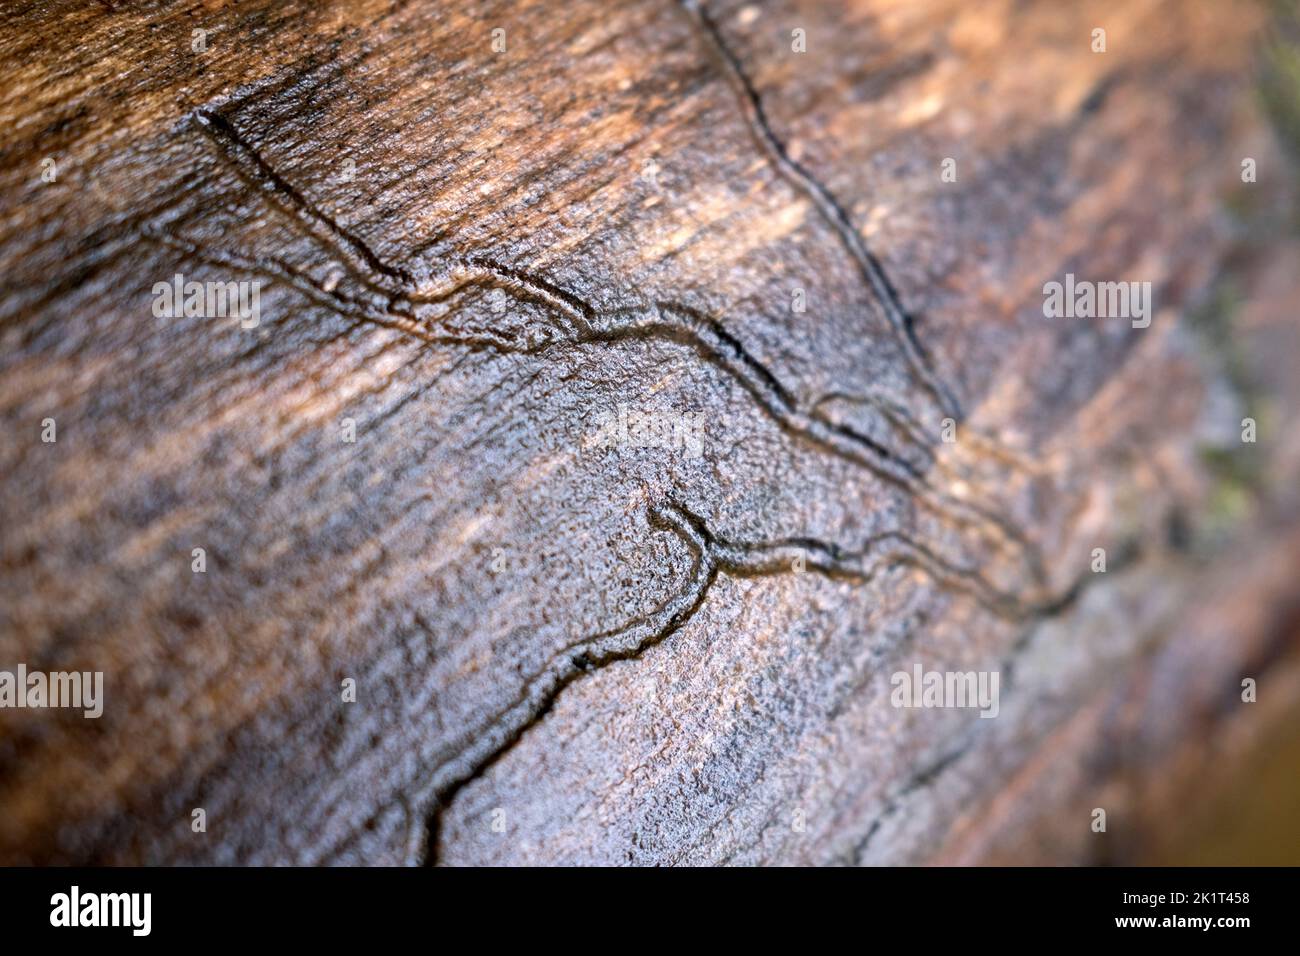 Paths made in tree trunk by worms in close up Stock Photo